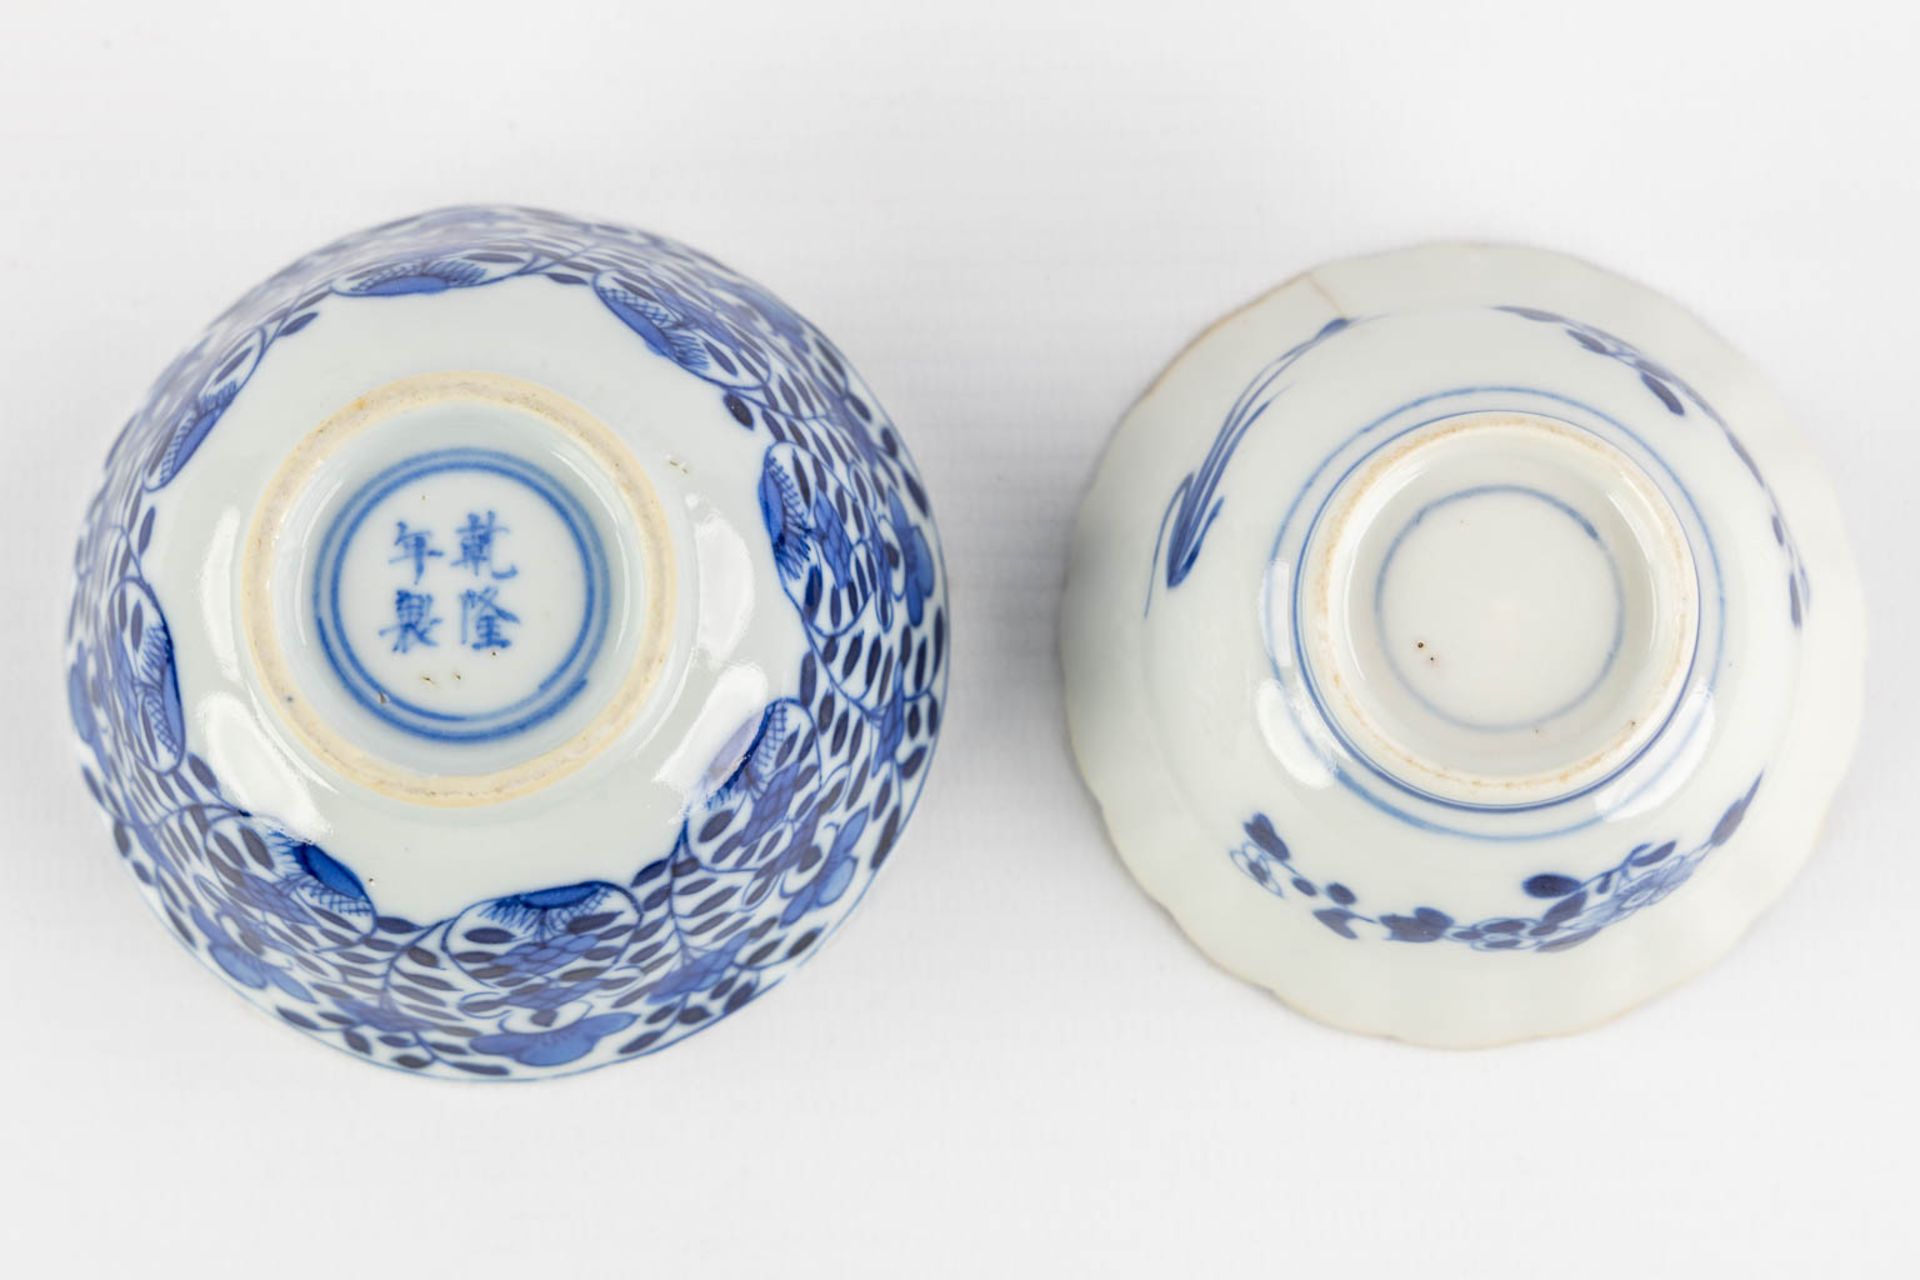 A pair of Chinese plate, blue-white decor of 'Fish and Crab', 19th C. (D:13,5 cm) - Image 7 of 9